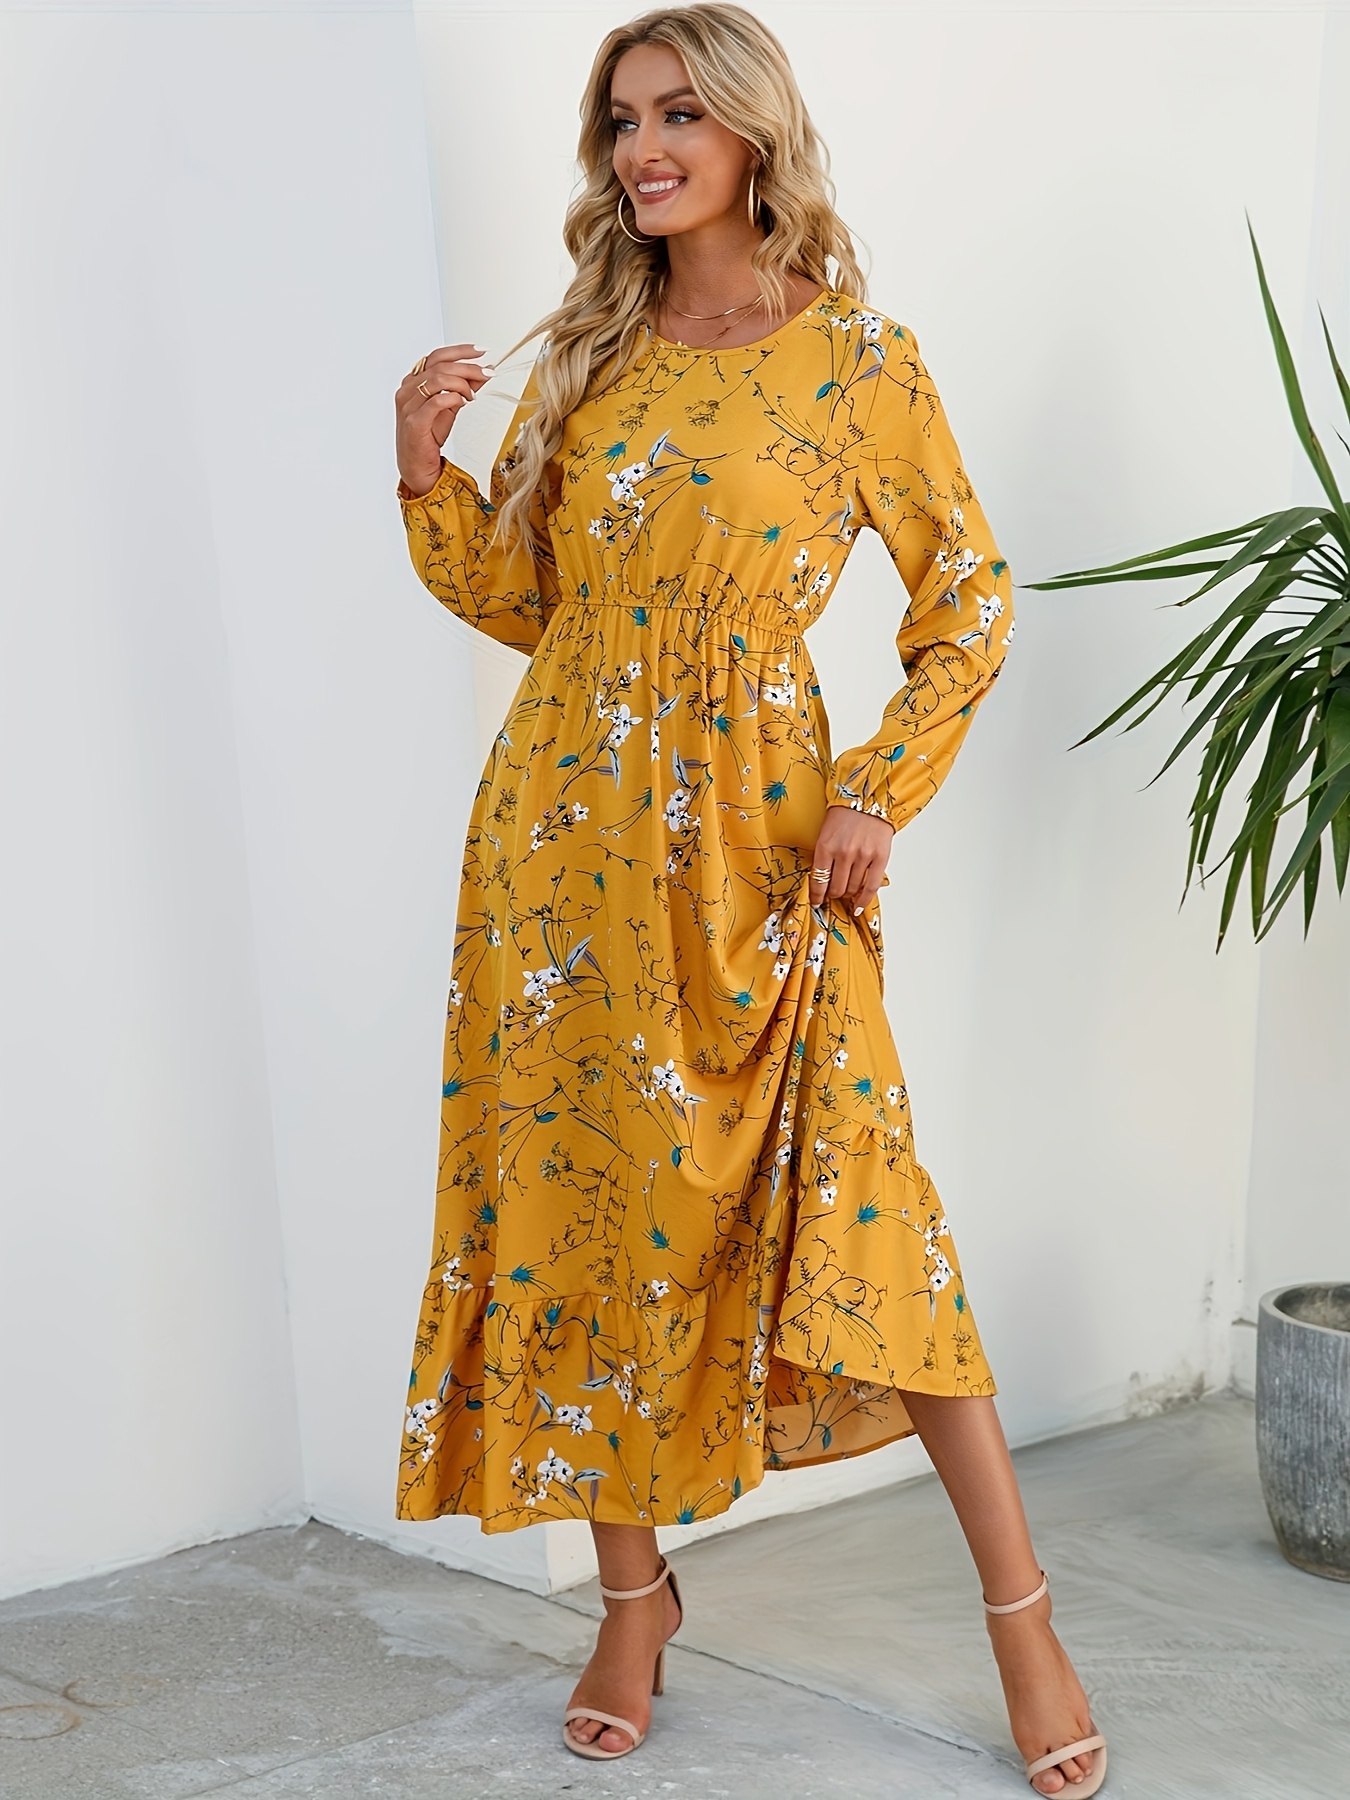 ditsy floral print dress vacation crew neck long sleeve maxi dress womens clothing